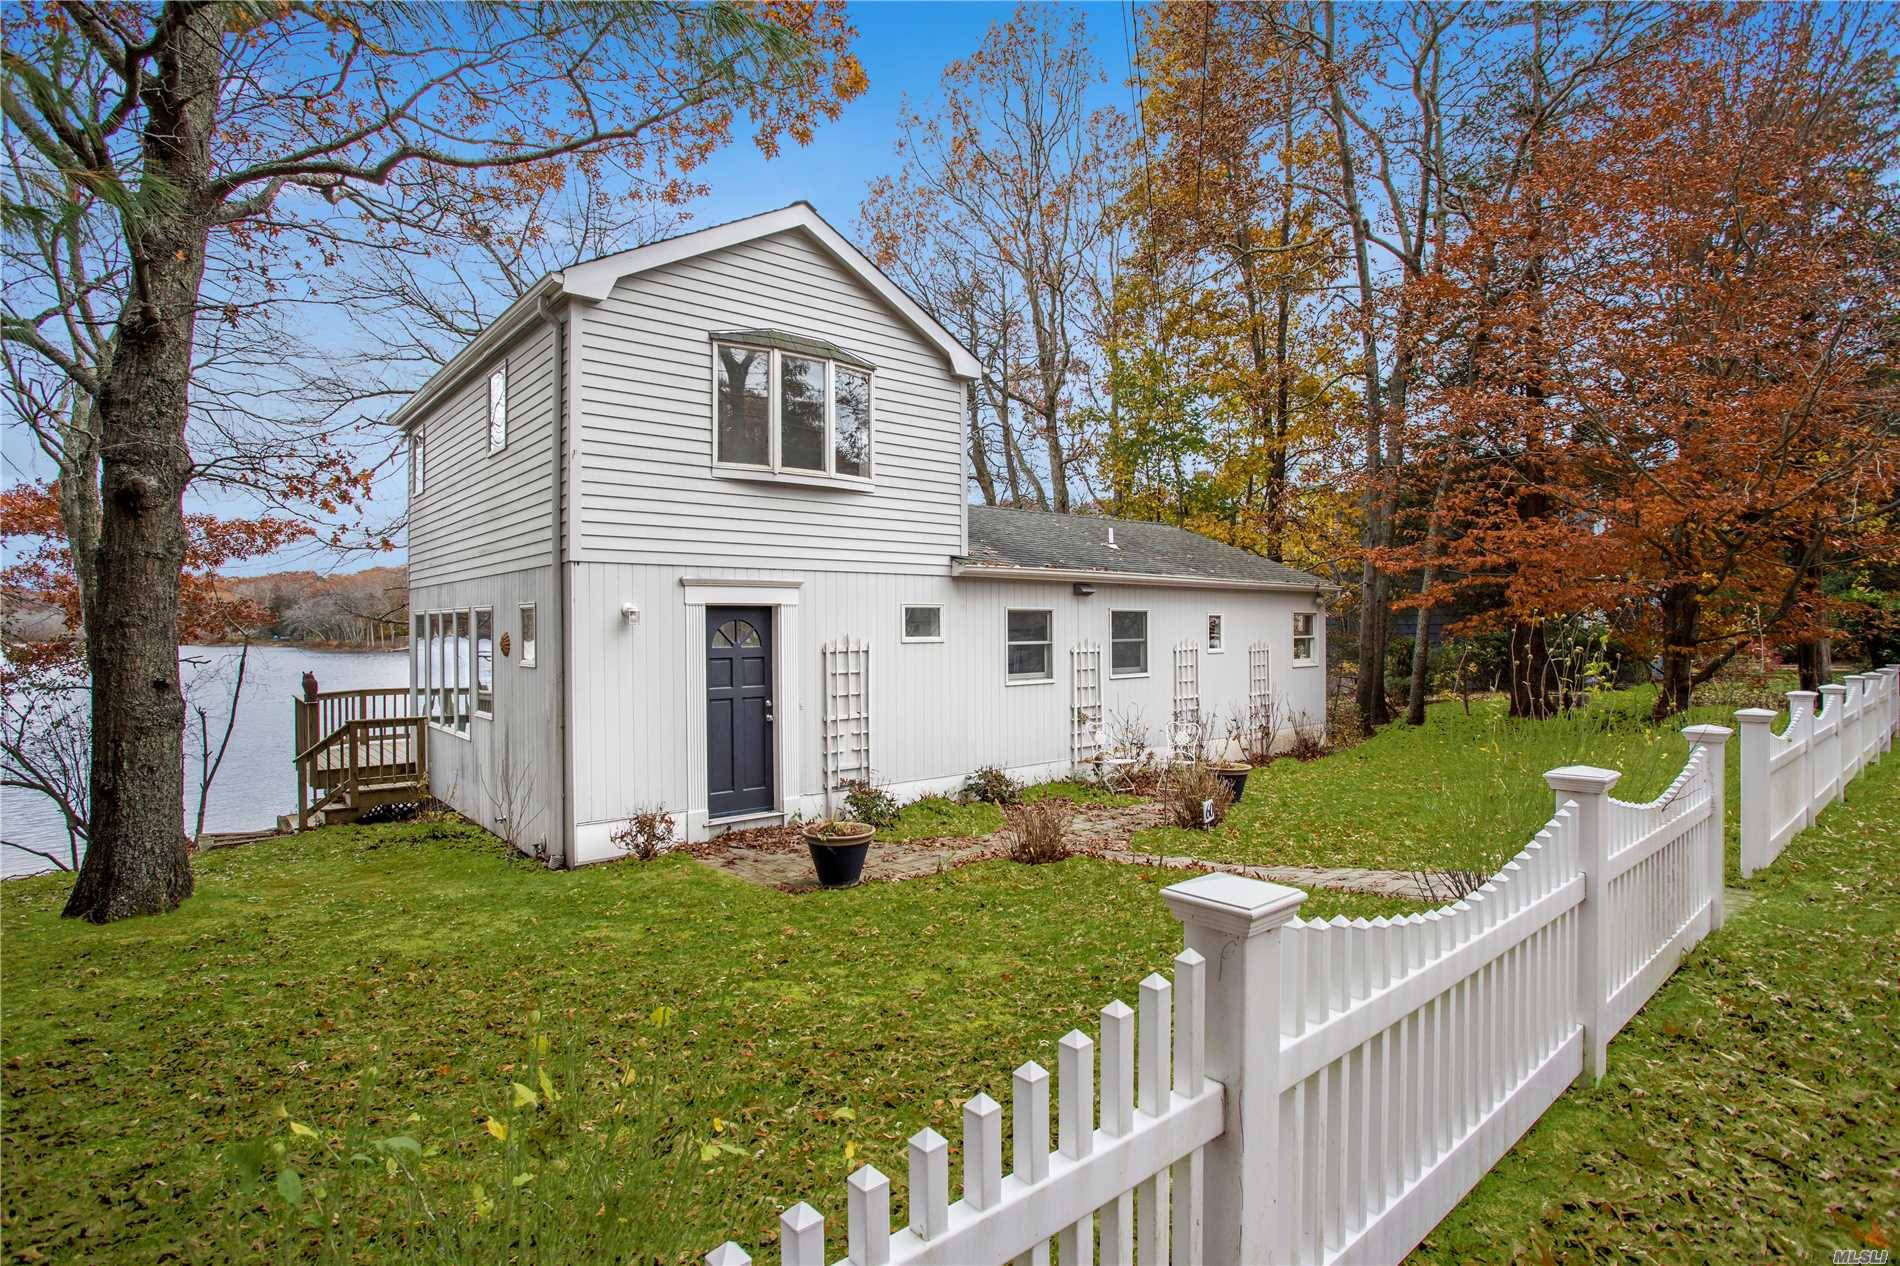 Located In The Desirable Little Fresh Pond Community This Fully Renovated Beach House Is Ready For Your Hampton's Experience.